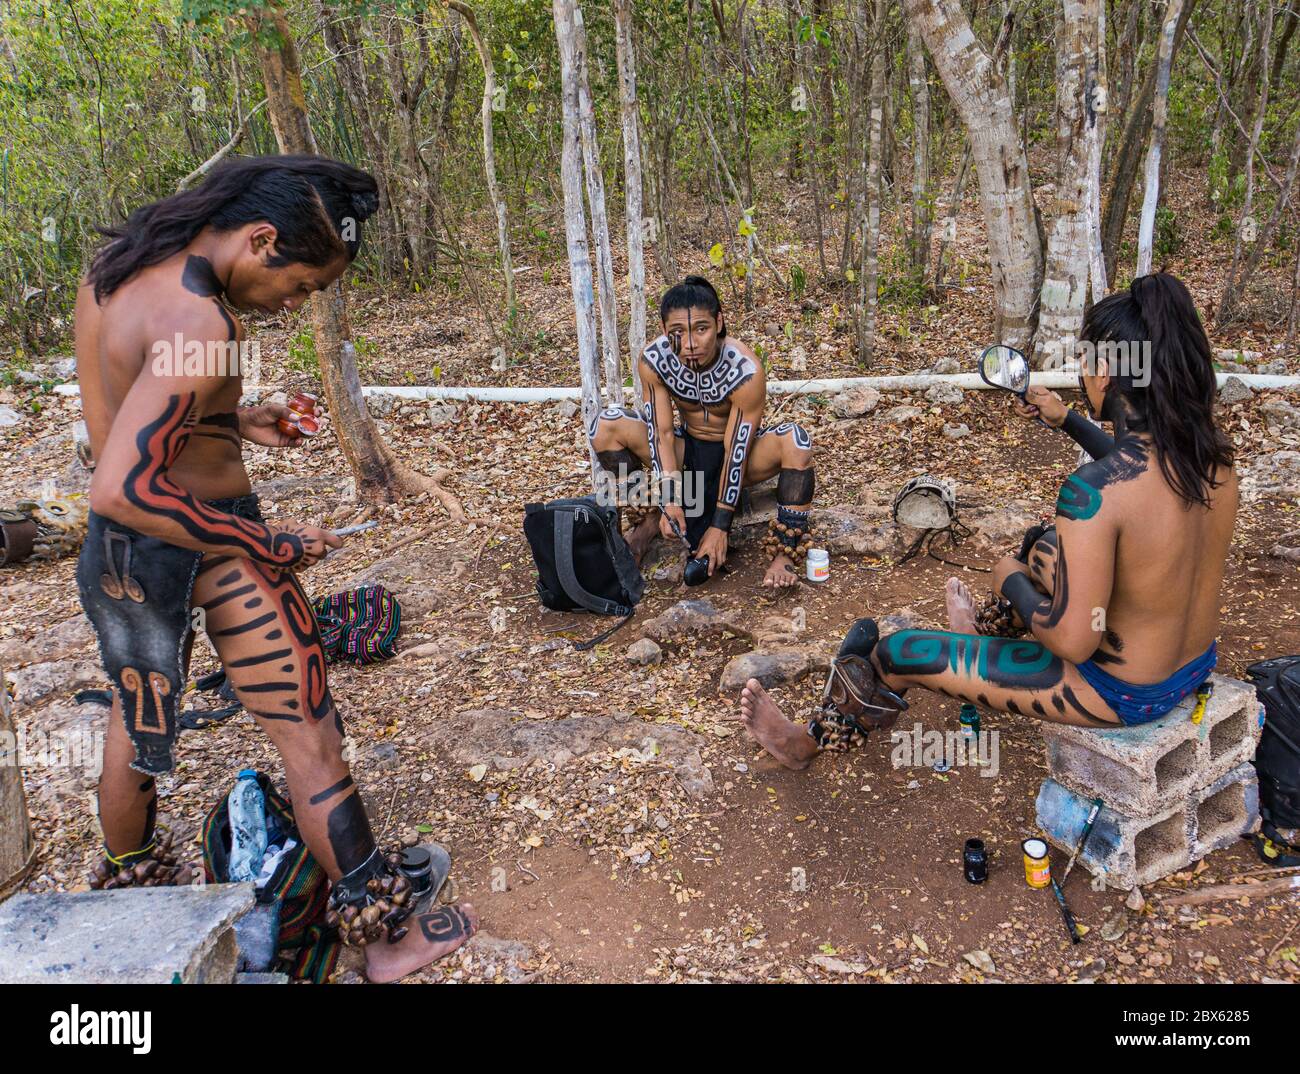 Valladolid, Yucatan/Mexico - February 24,2020: young Mayan men preparing themselves in costume for performing traditional Mayan ceremony Stock Photo